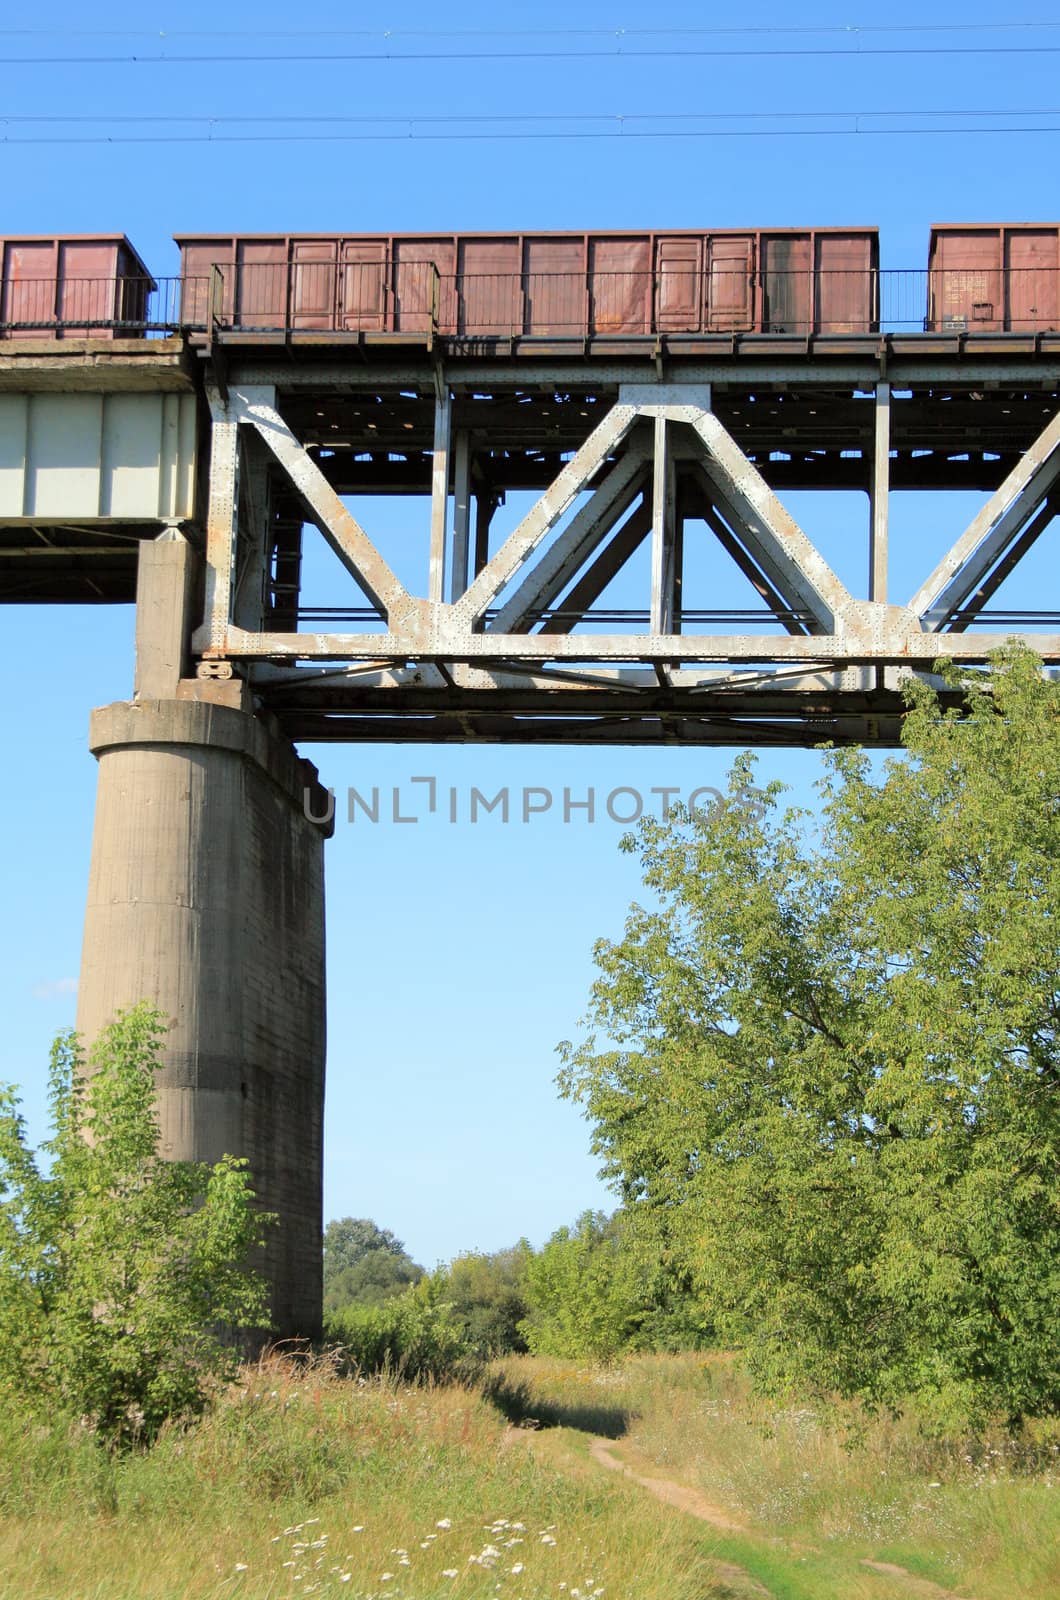 Freight train passing the steel bridge over the river
